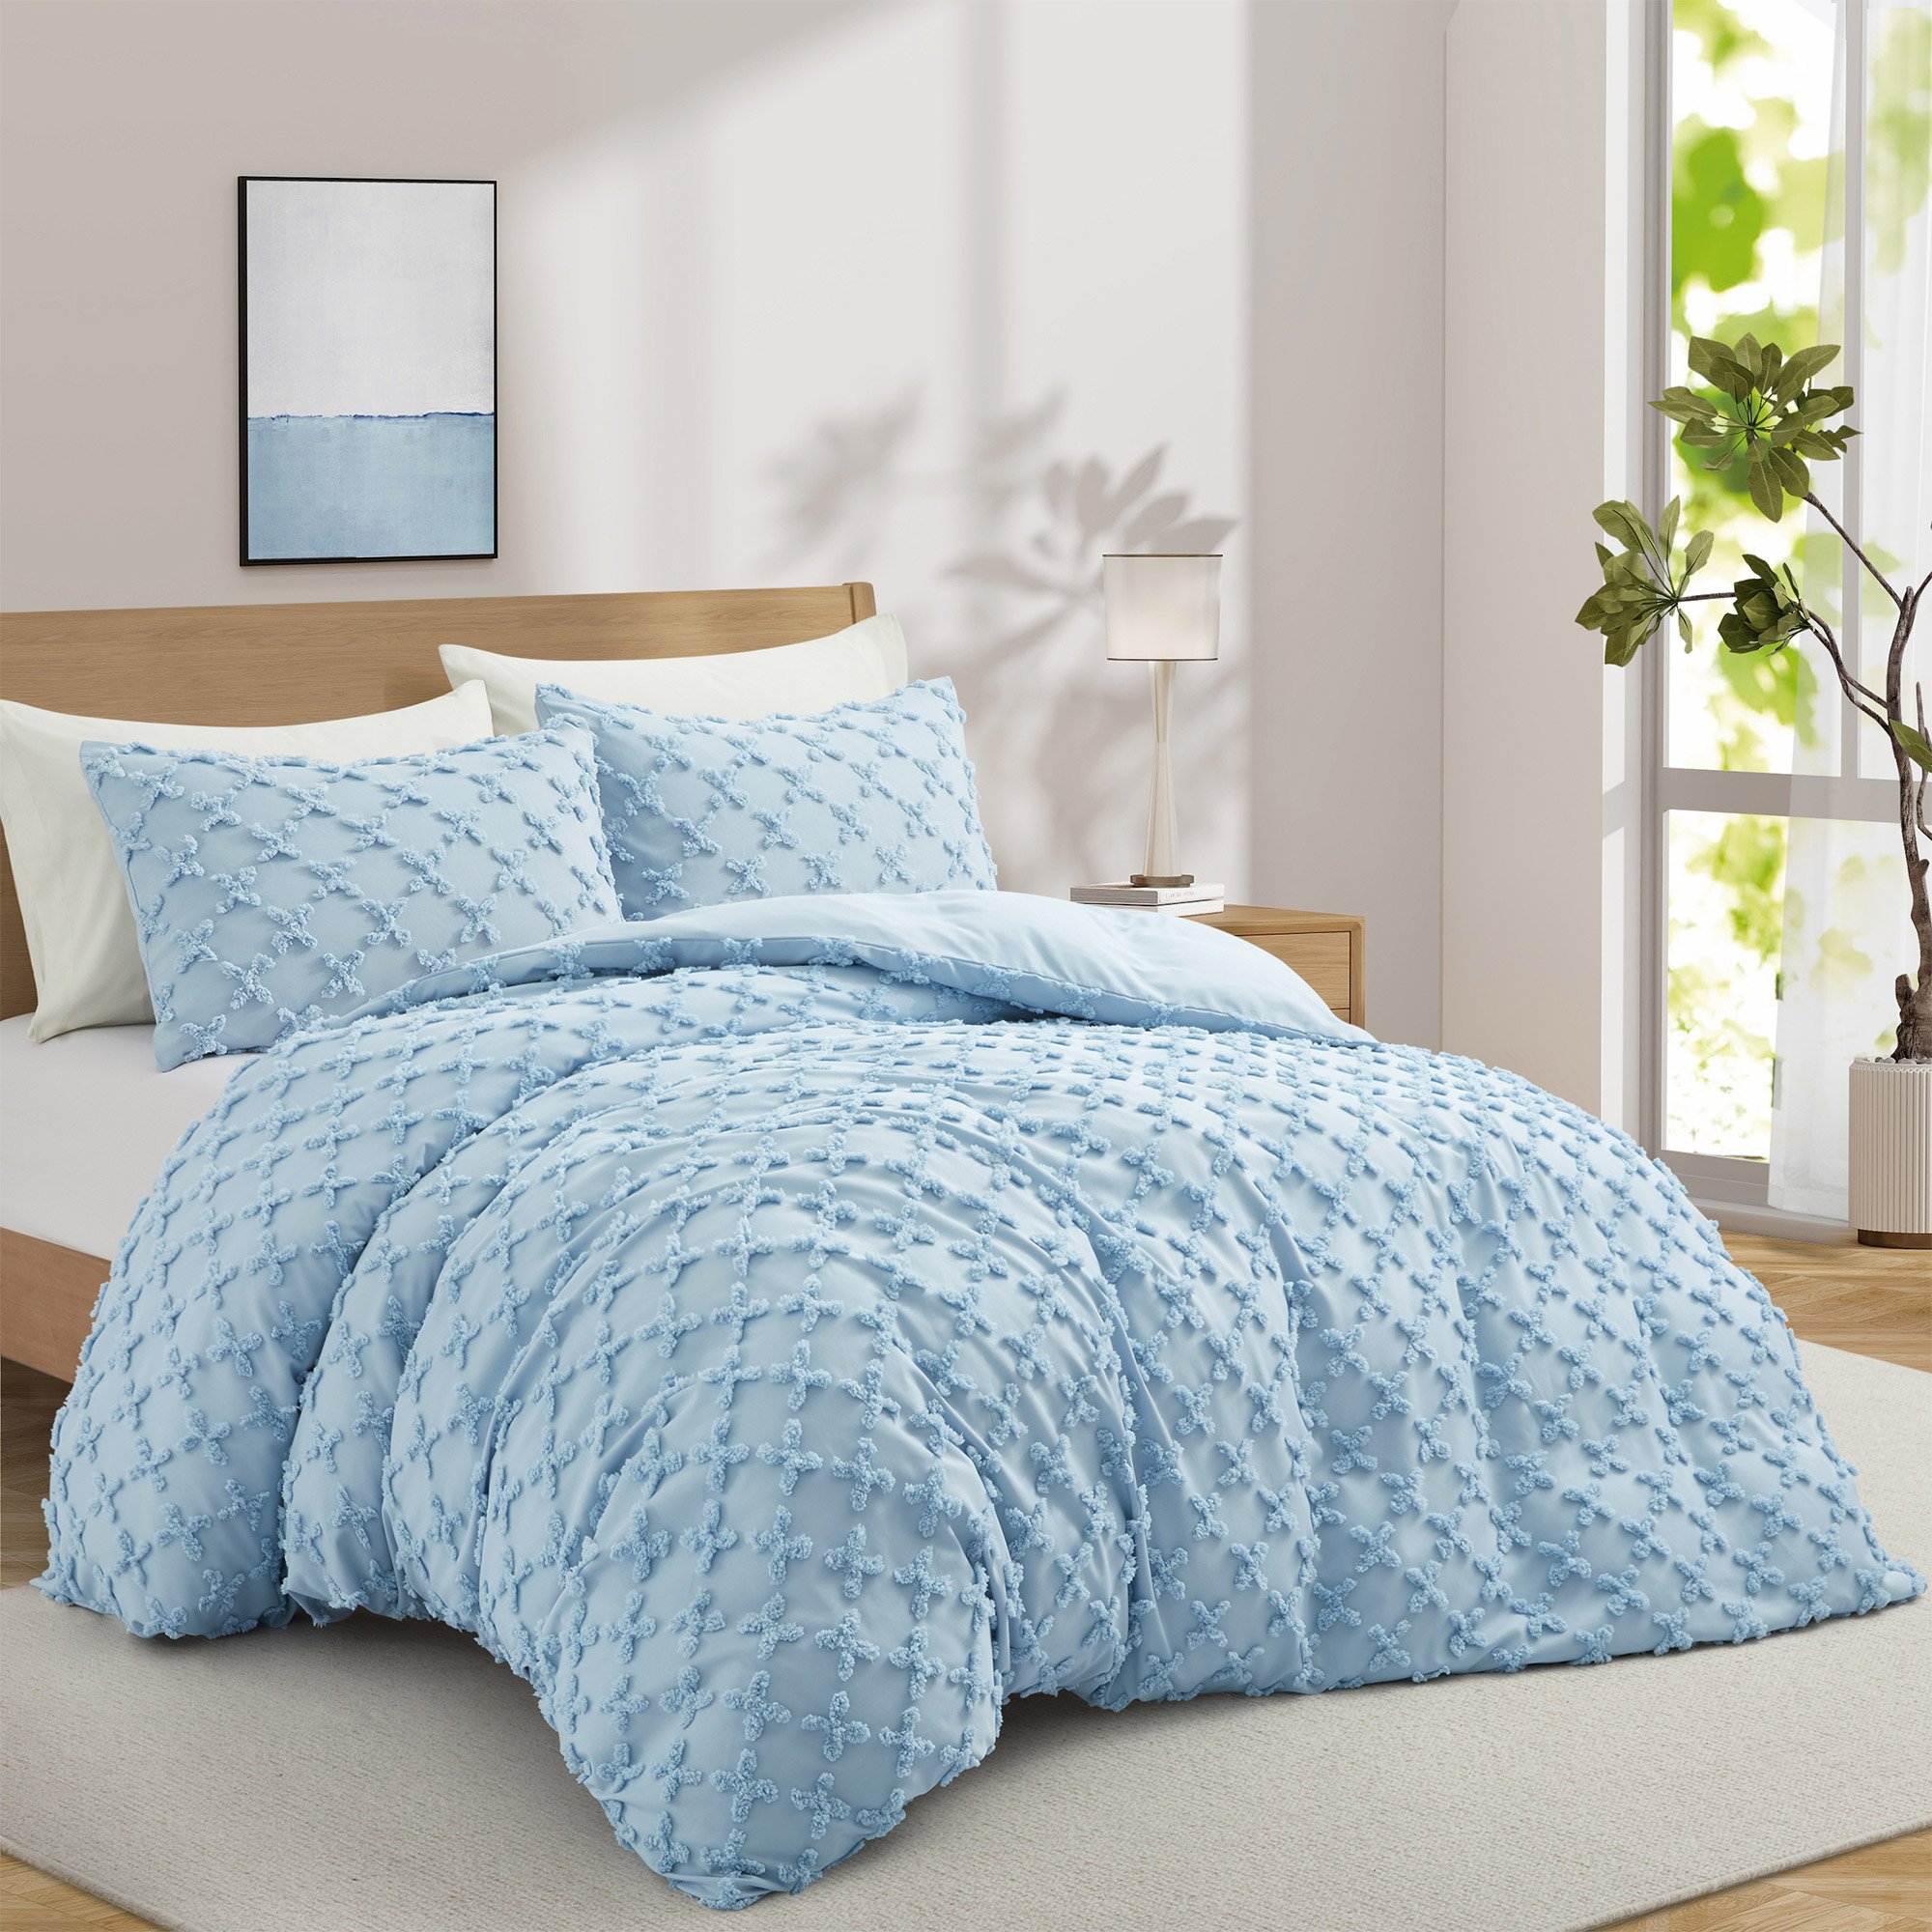 2 Or 3 Piece Soft Microfiber Clipped Duvet Cover Set With Shams - Baby Blue, Twin-68*90